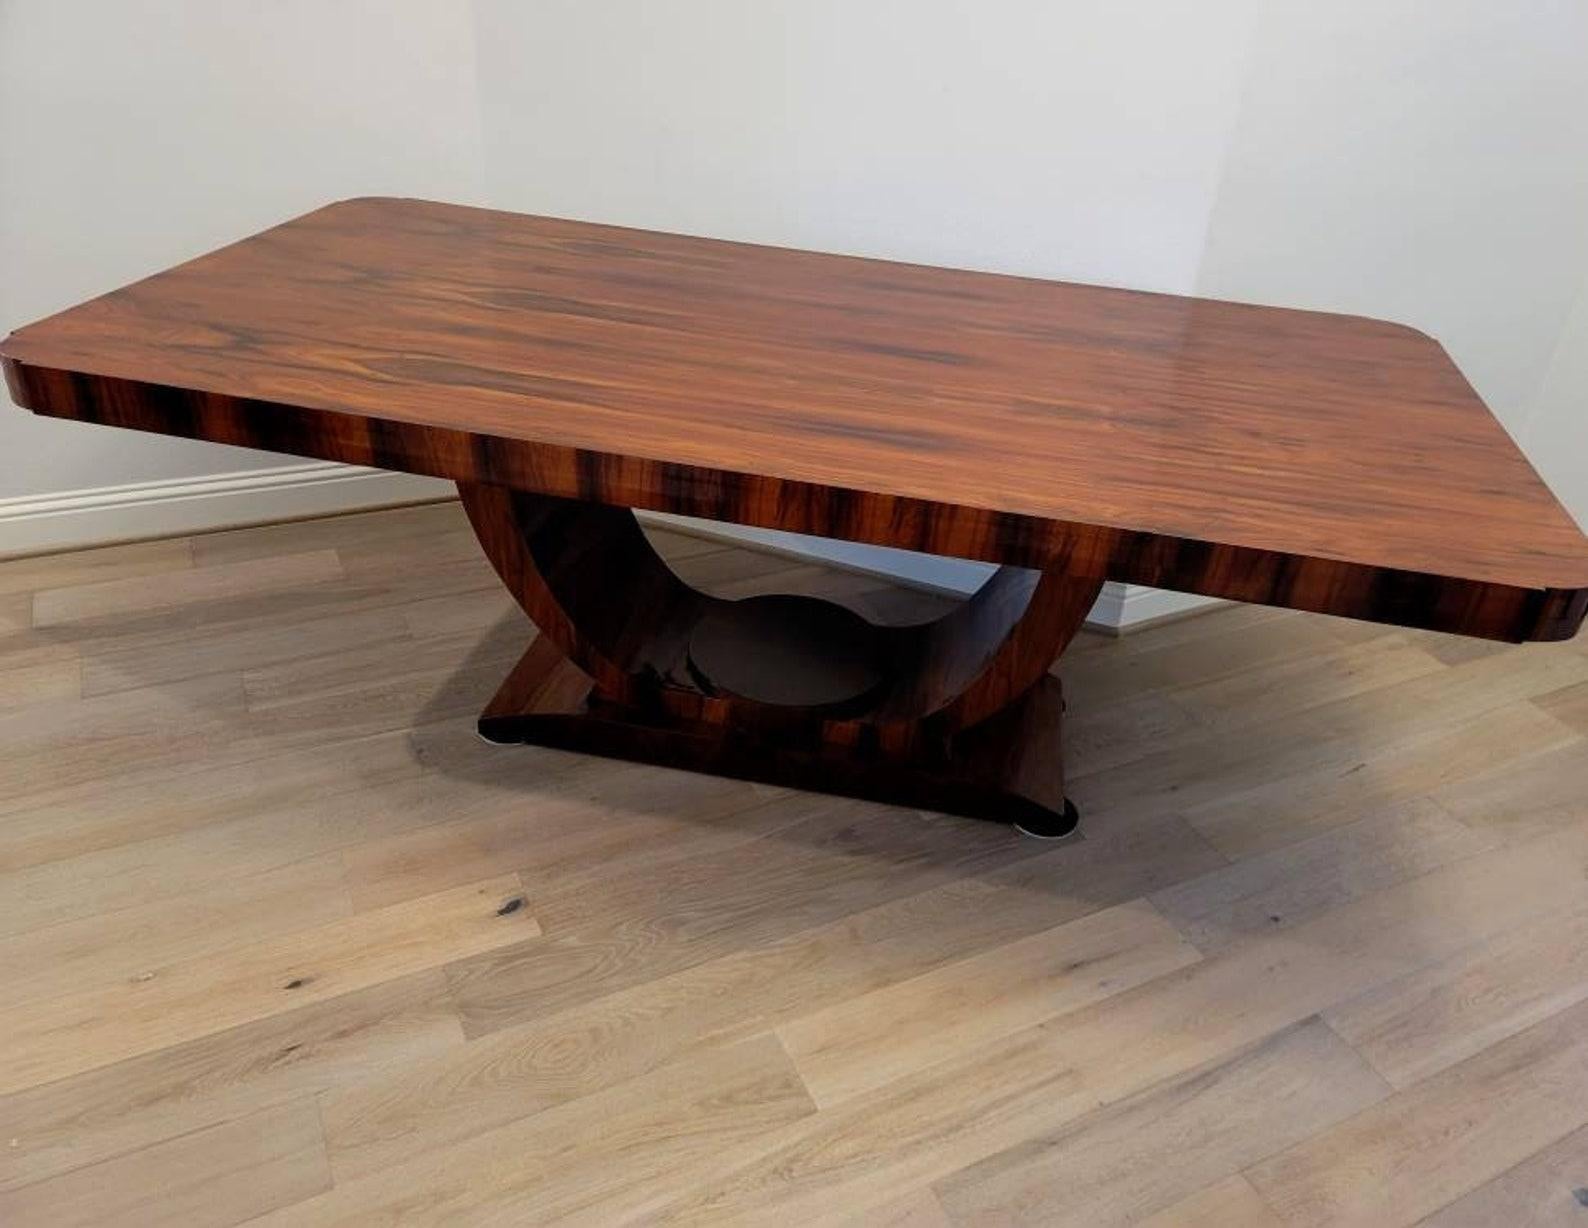 Monumental French Art Deco Rosewood Gondola Dining Table, Ruhlmann Style For Sale 2